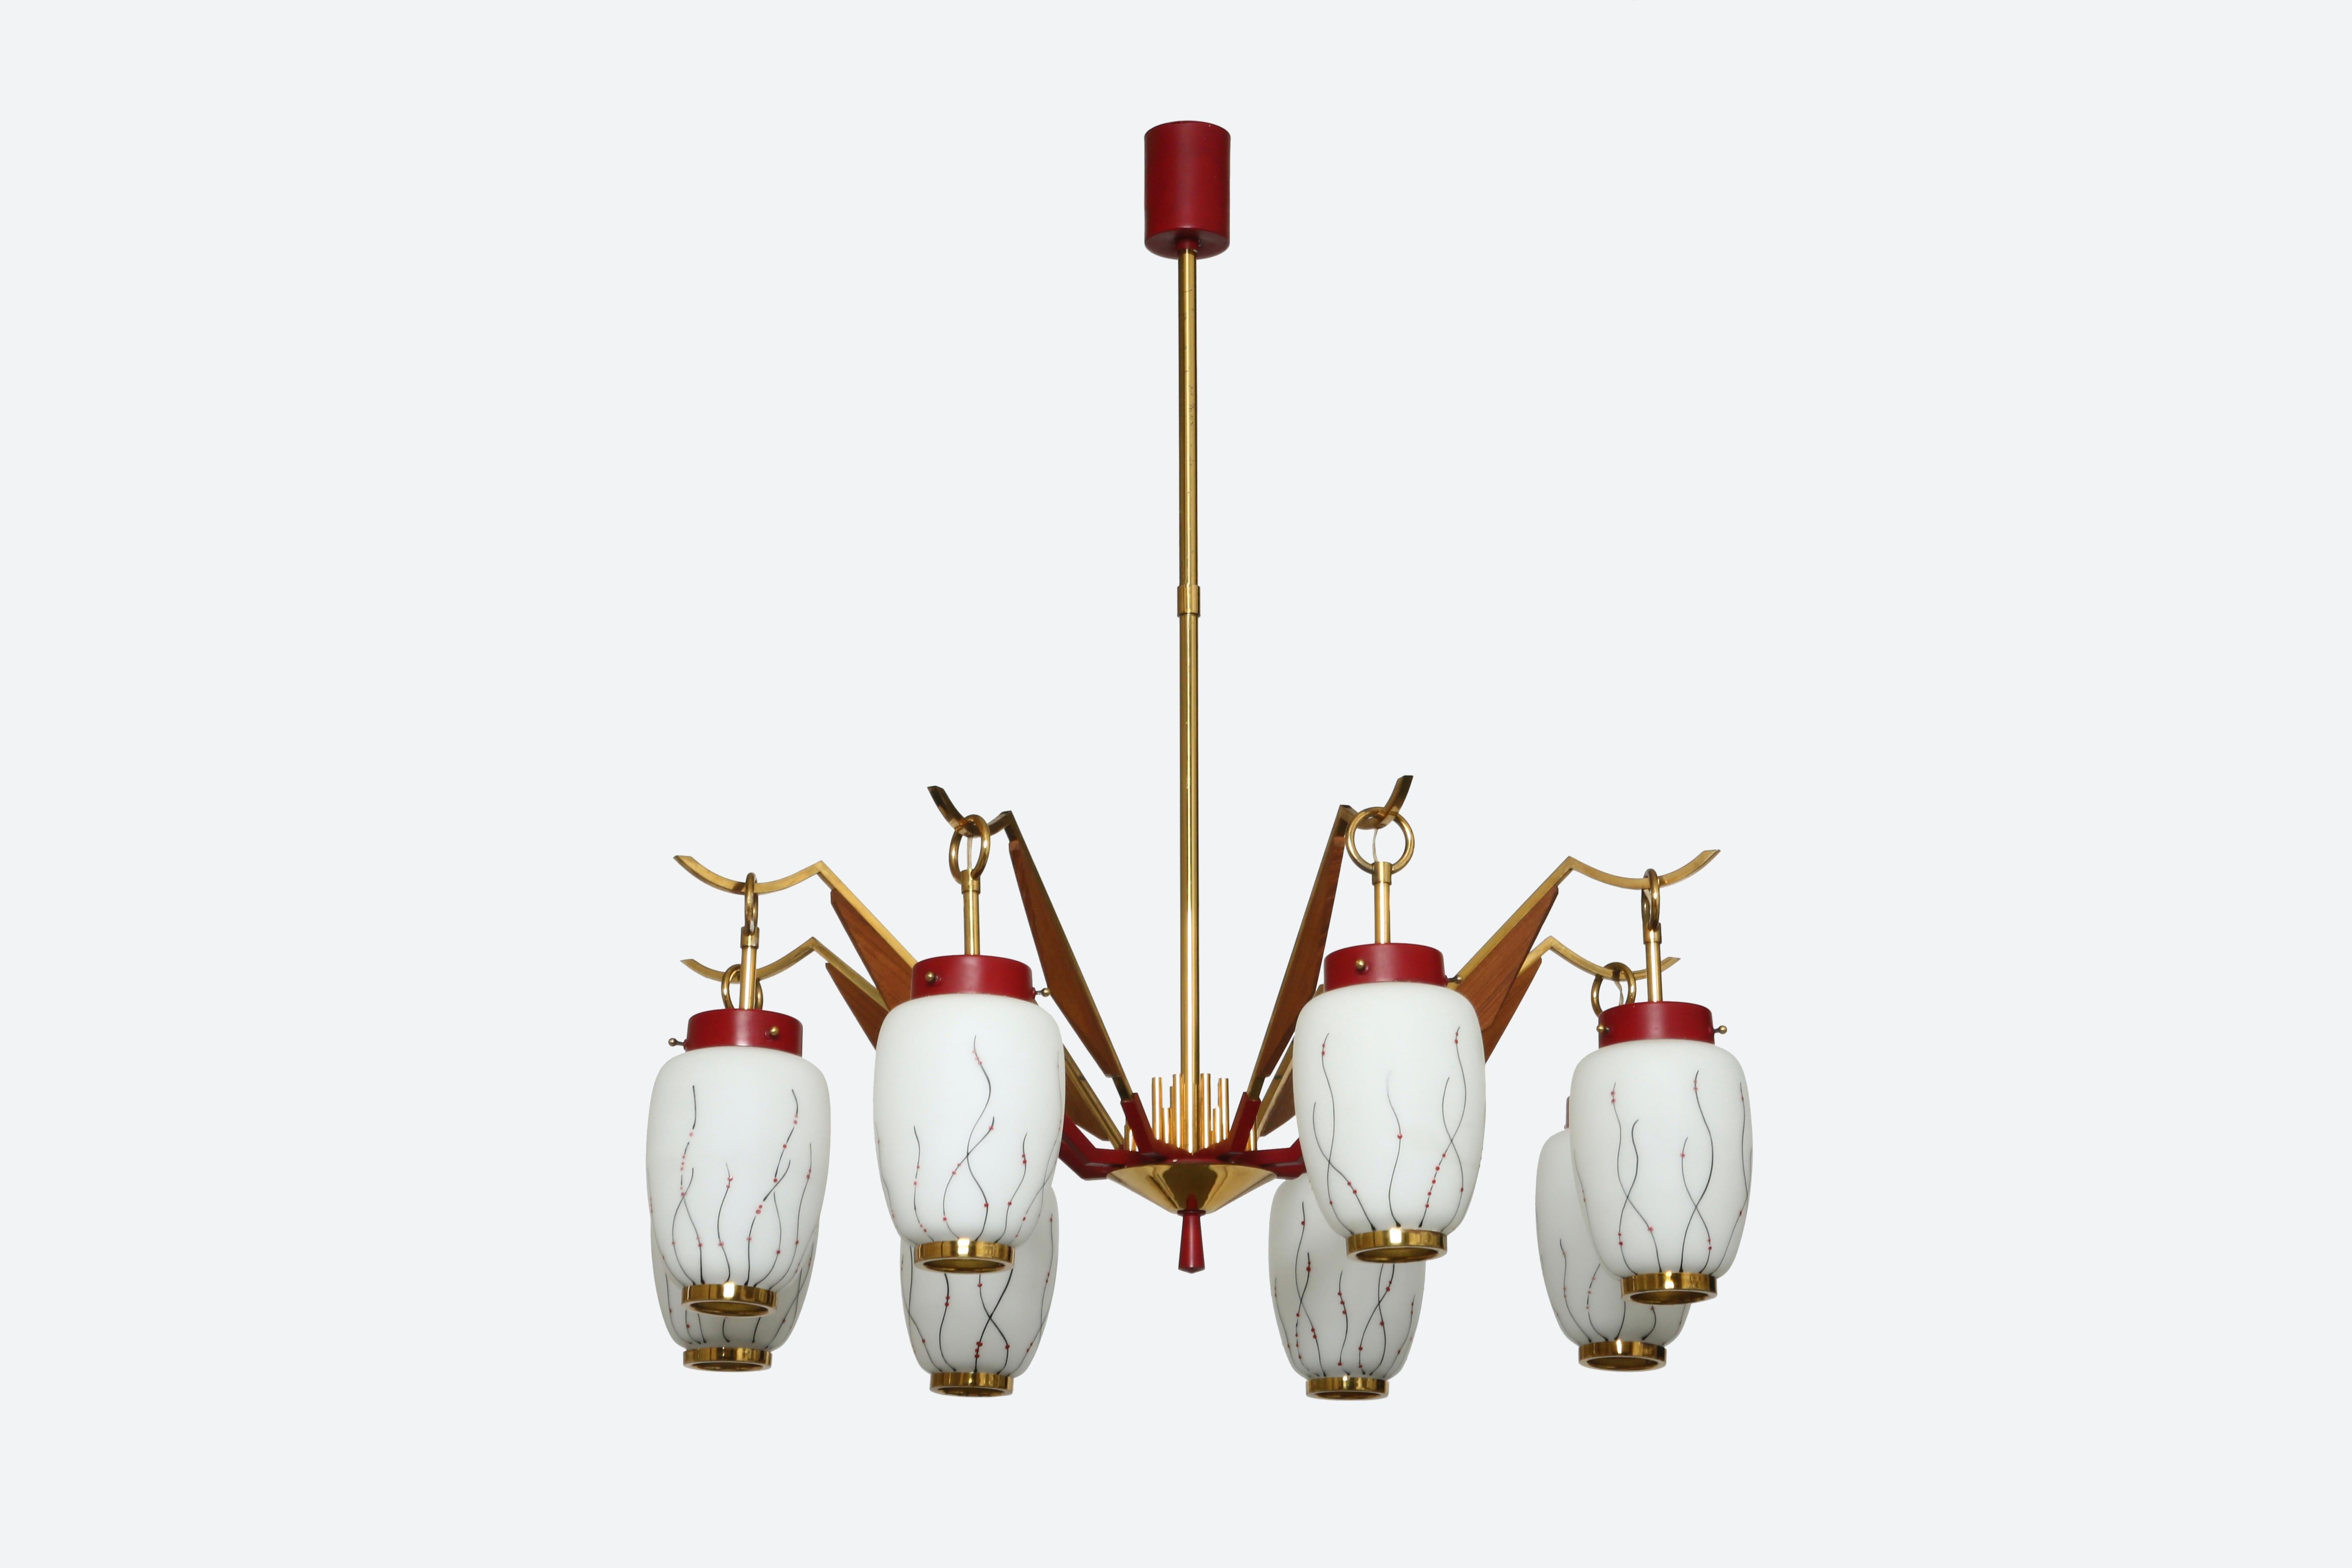 Stilnovo style chandelier with eight arms.
Made in Italy in 1960s.
Glass bells with floral decoration.
 